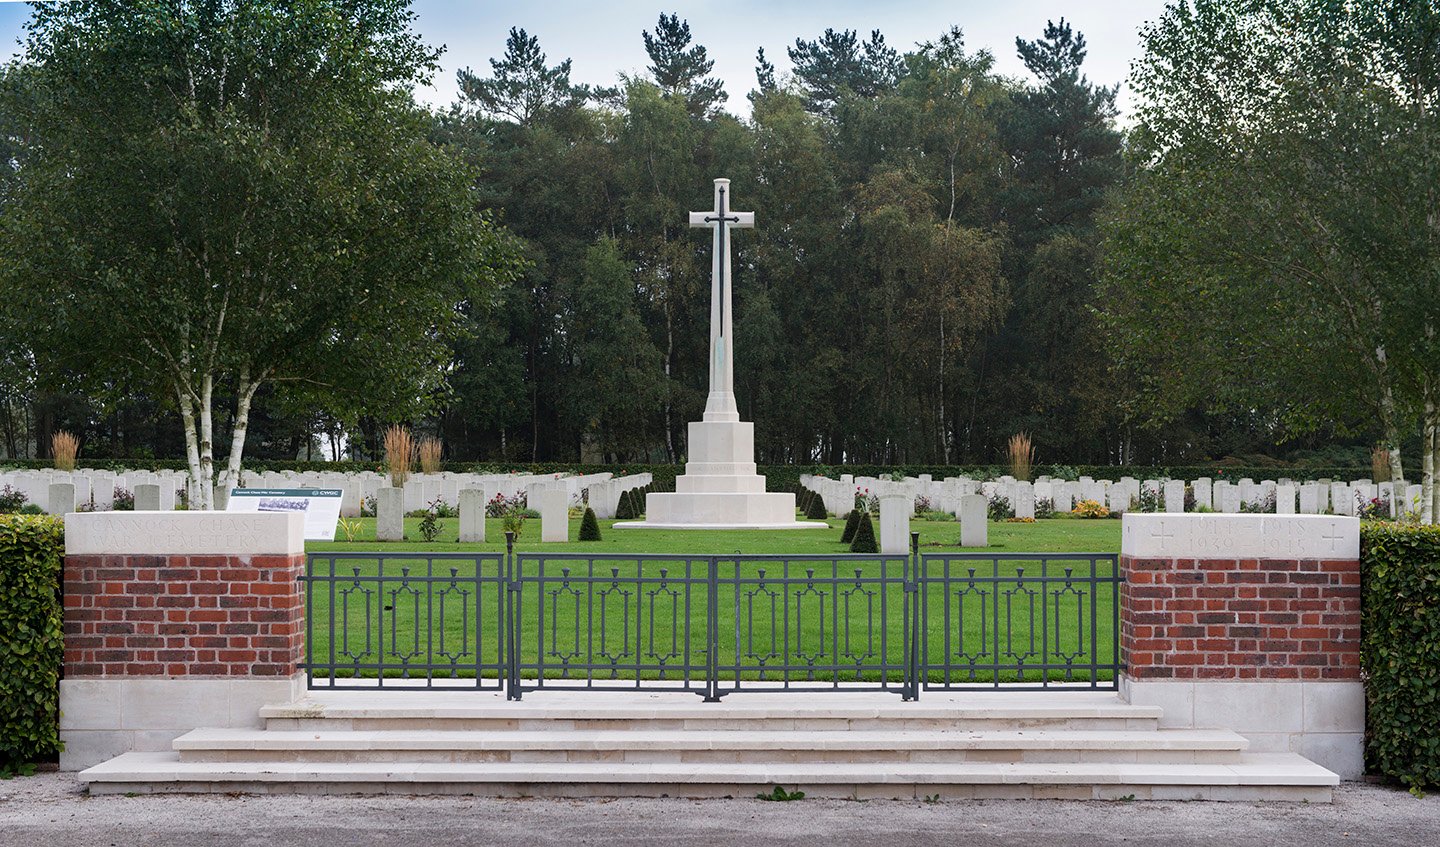 Colour photograph showing a cenotaph behind a metal gate with rows of well tended gravestones in the background